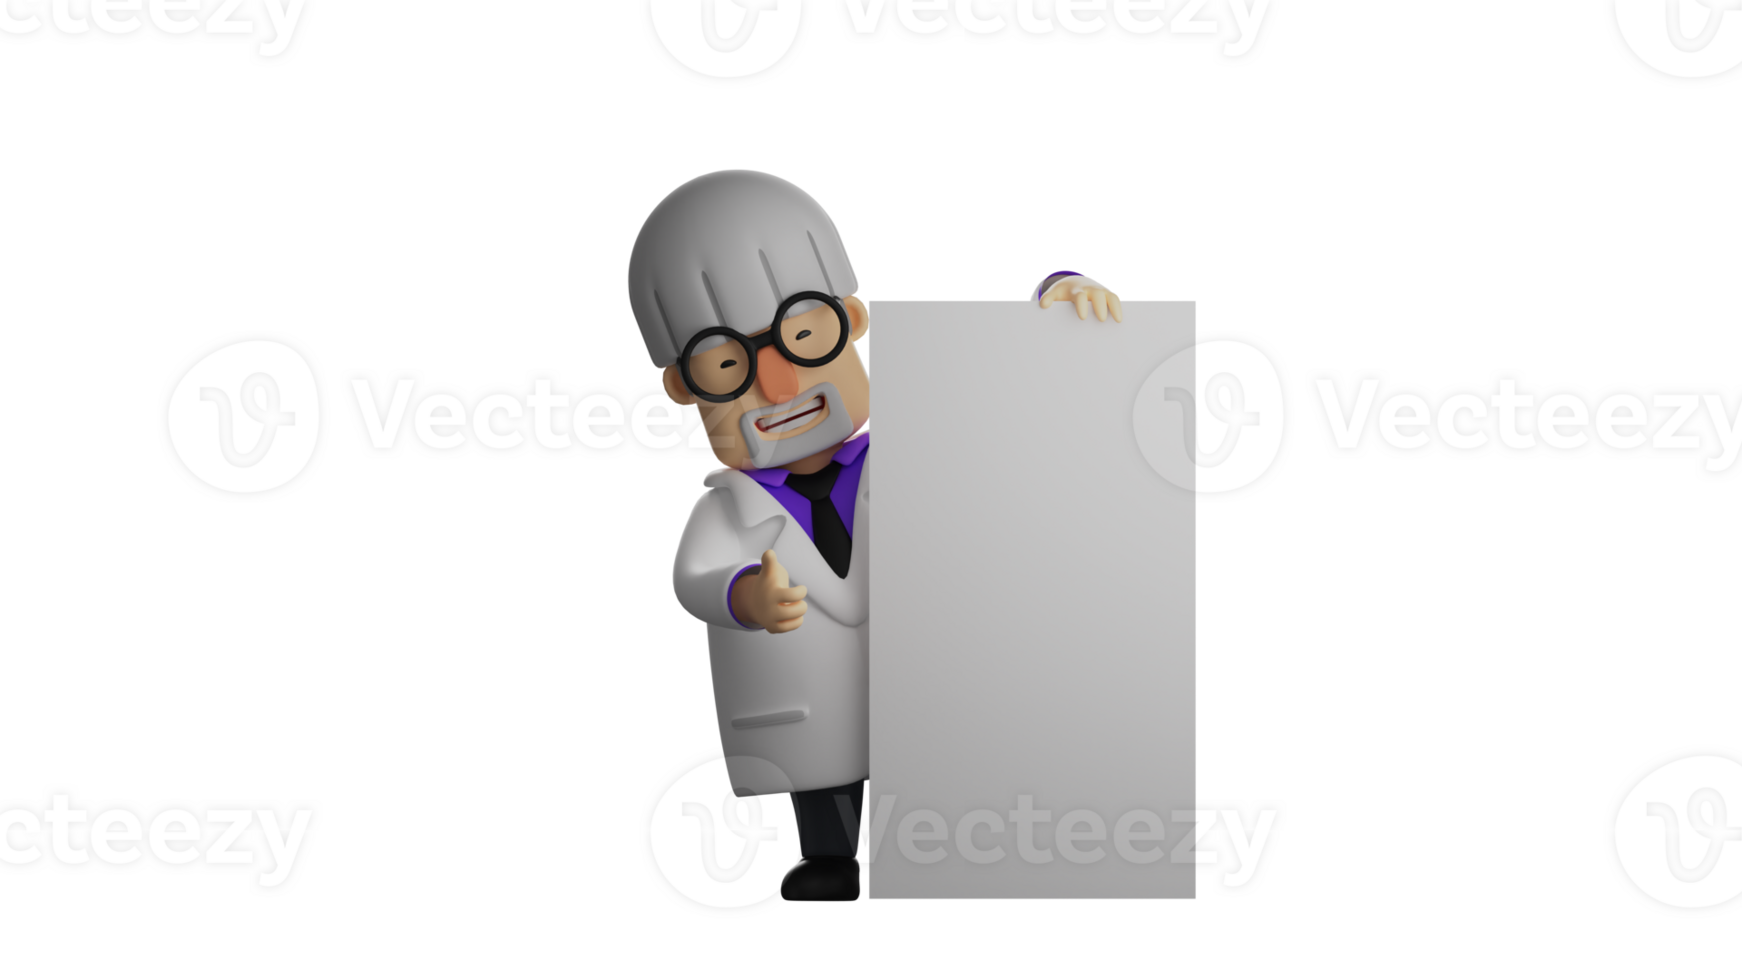 3D illustration. Enchanting Professor 3D cartoon character. The professor stood by the long white paper he was holding. Professor smiled sweetly while giving a thumbs up. 3D cartoon character png